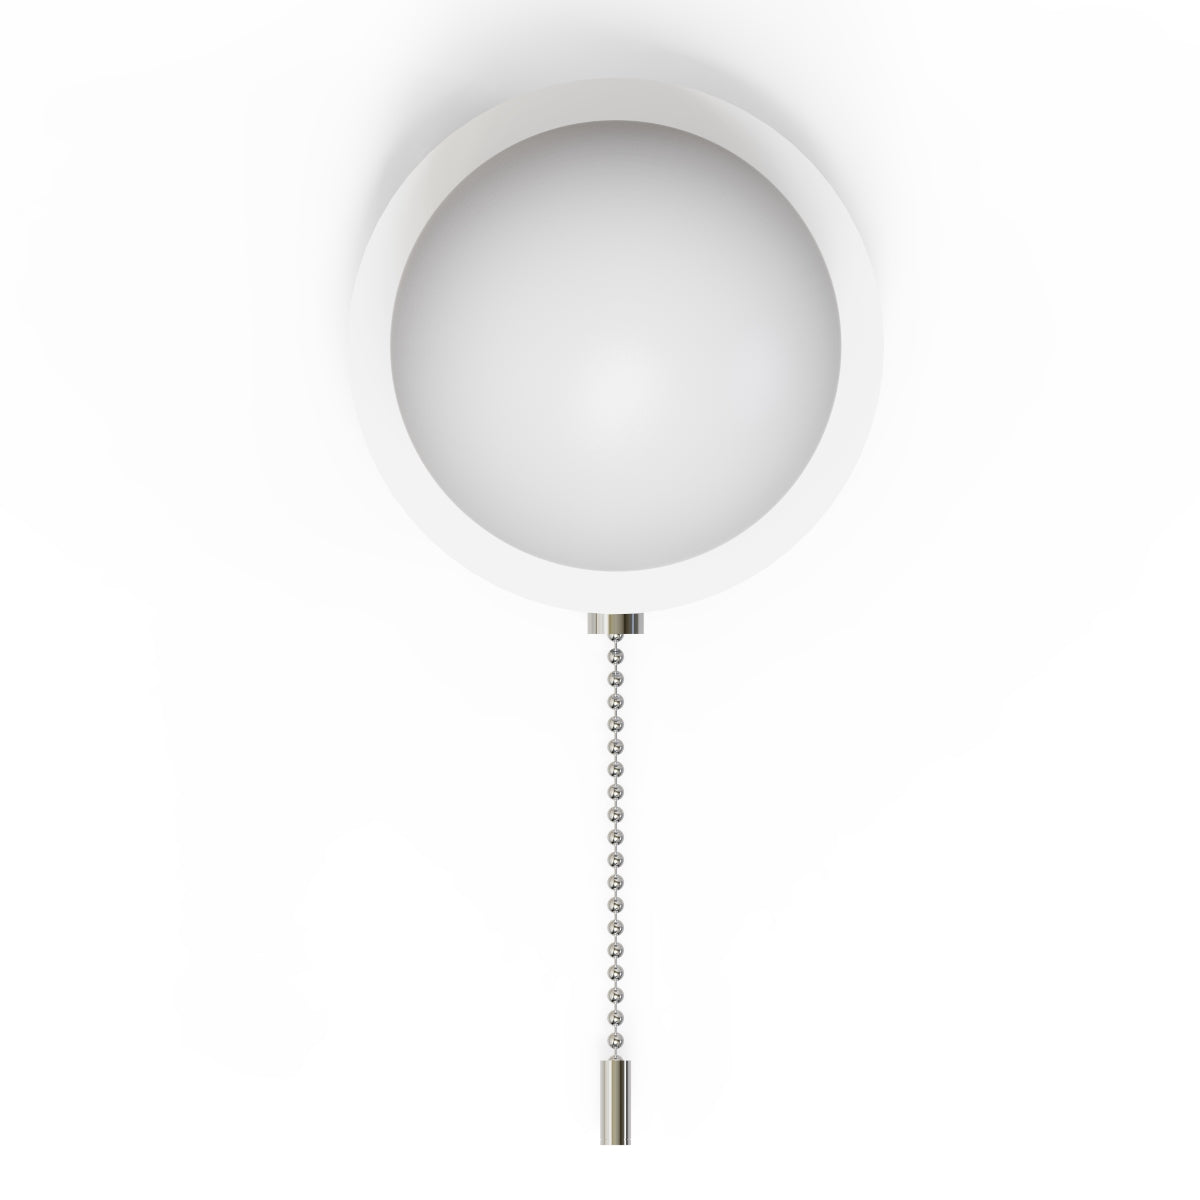  Macie's elegant and stylish finish makes it the ideal addition to any room. It will look perfect in both traditional and modern environments. The beauty of this wall light means you can install it on any wall without the requirement of expensive electrician fees and mains installation.